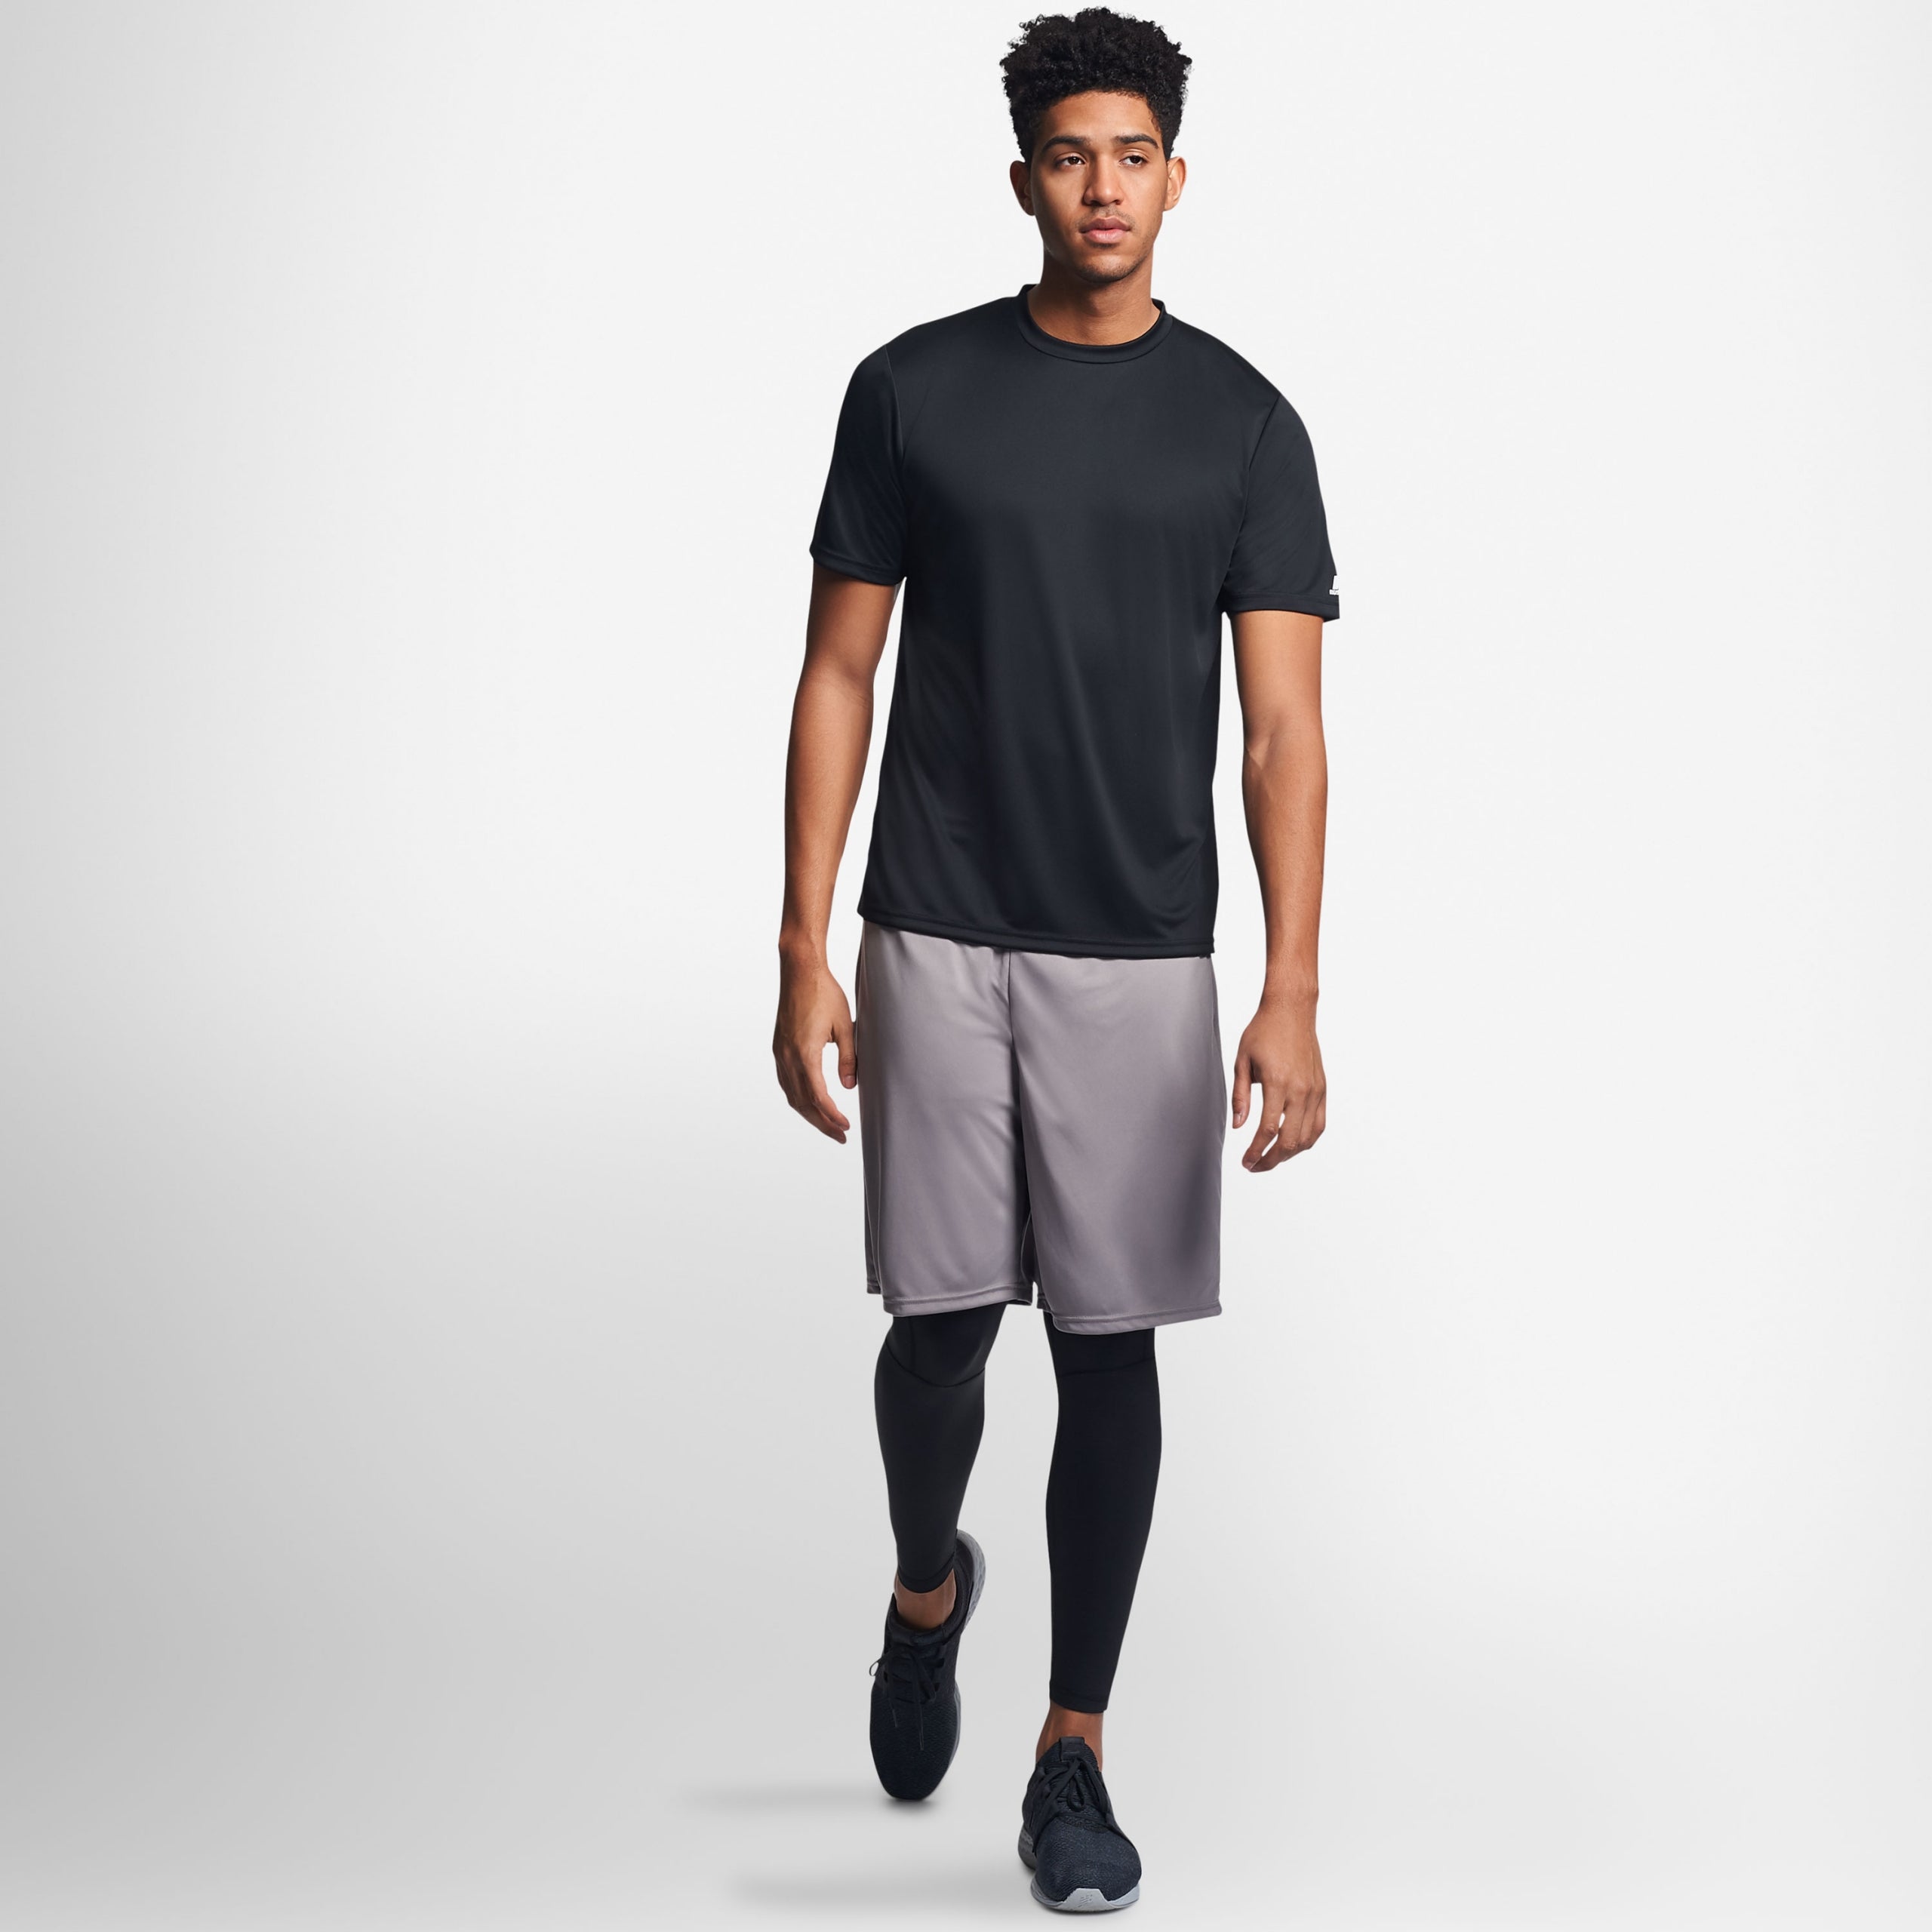 Russell Athletic Dri-Power Performance Youth T-Shirt